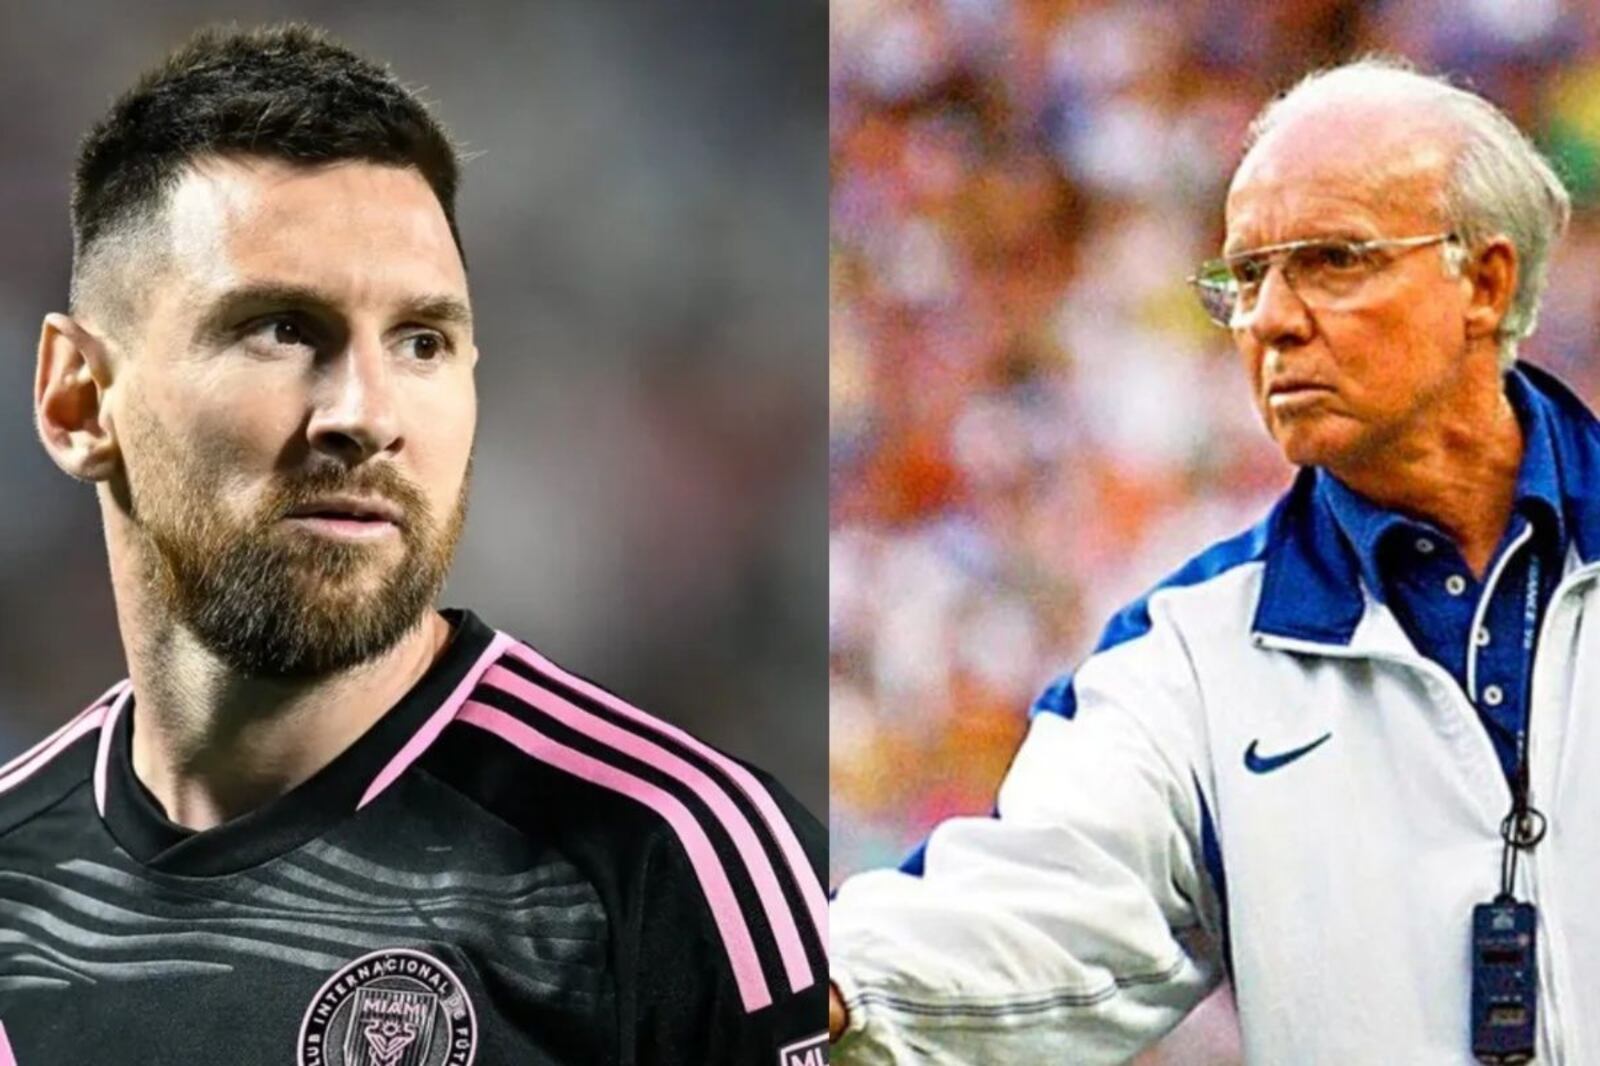 After Zagallo's death, the strong phrase that involves Lionel Messi and Pelé